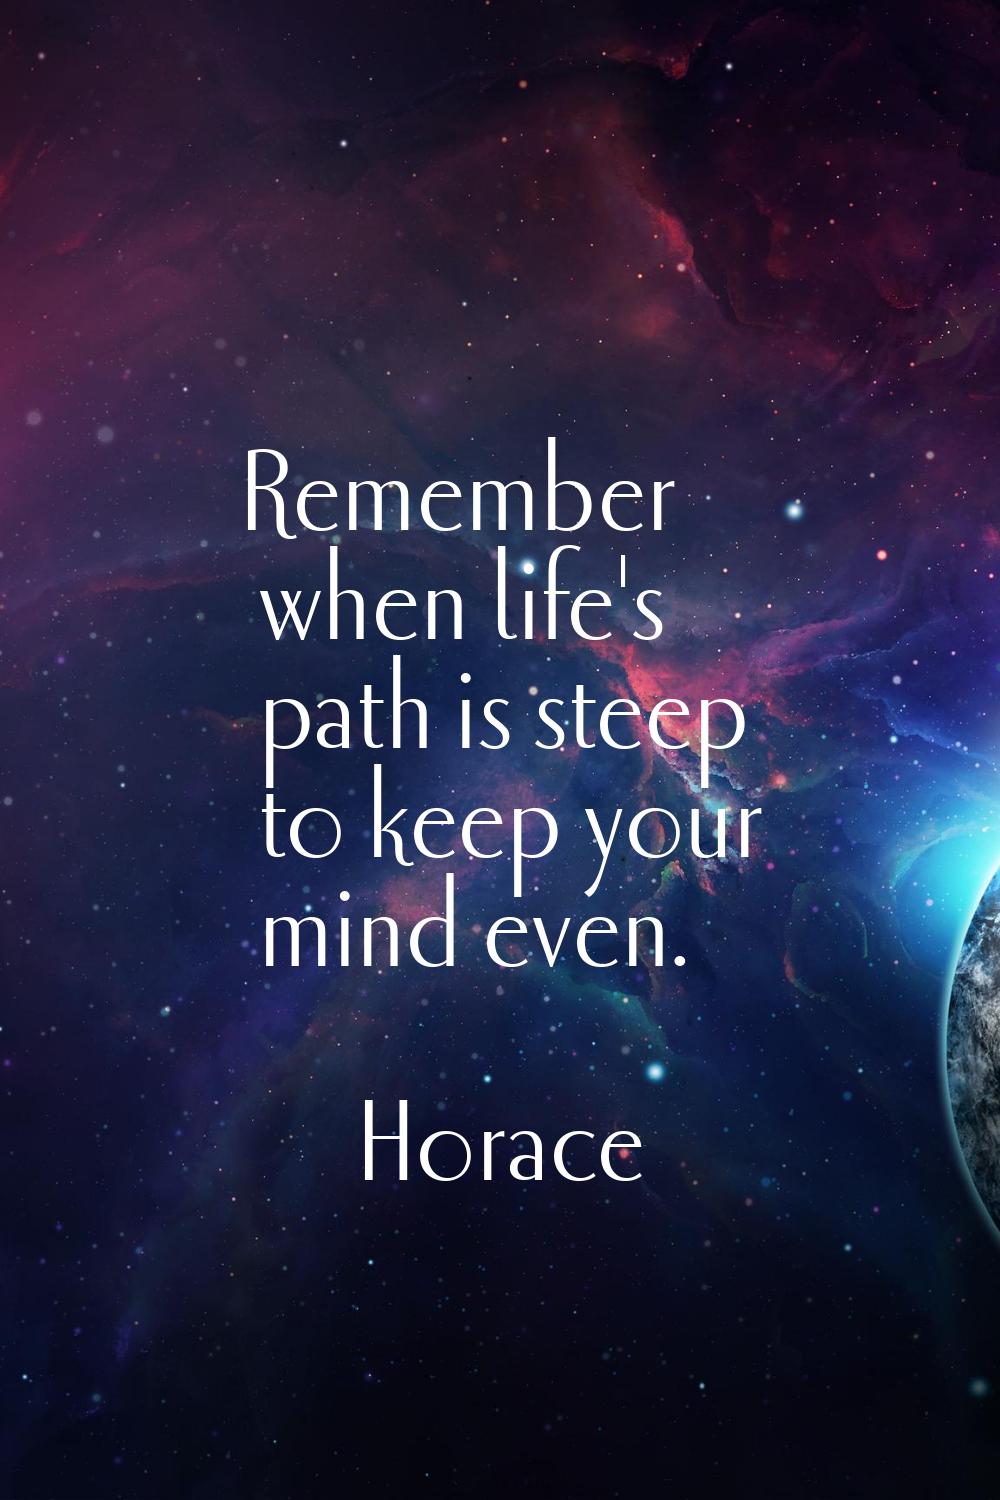 Remember when life's path is steep to keep your mind even.